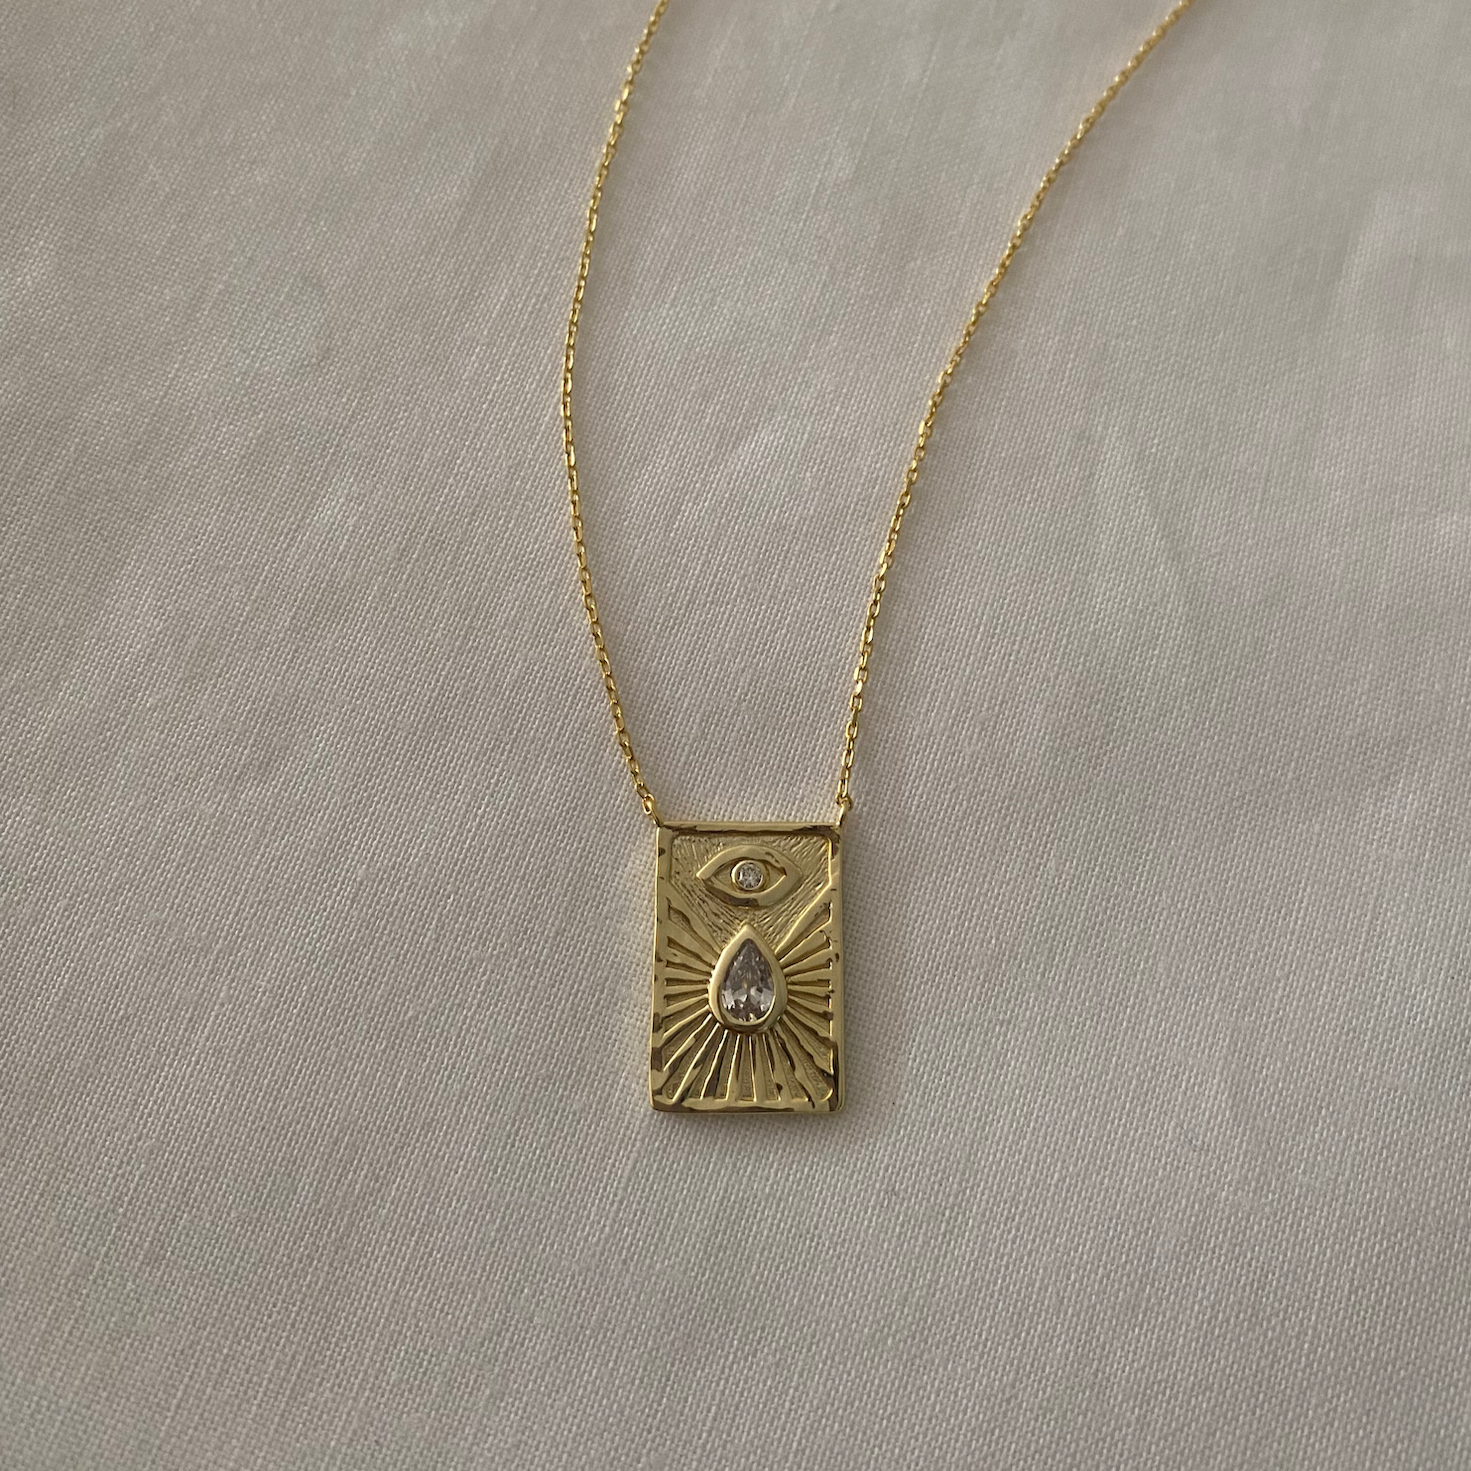 Aphrodite neckalce in 18ct gold plated